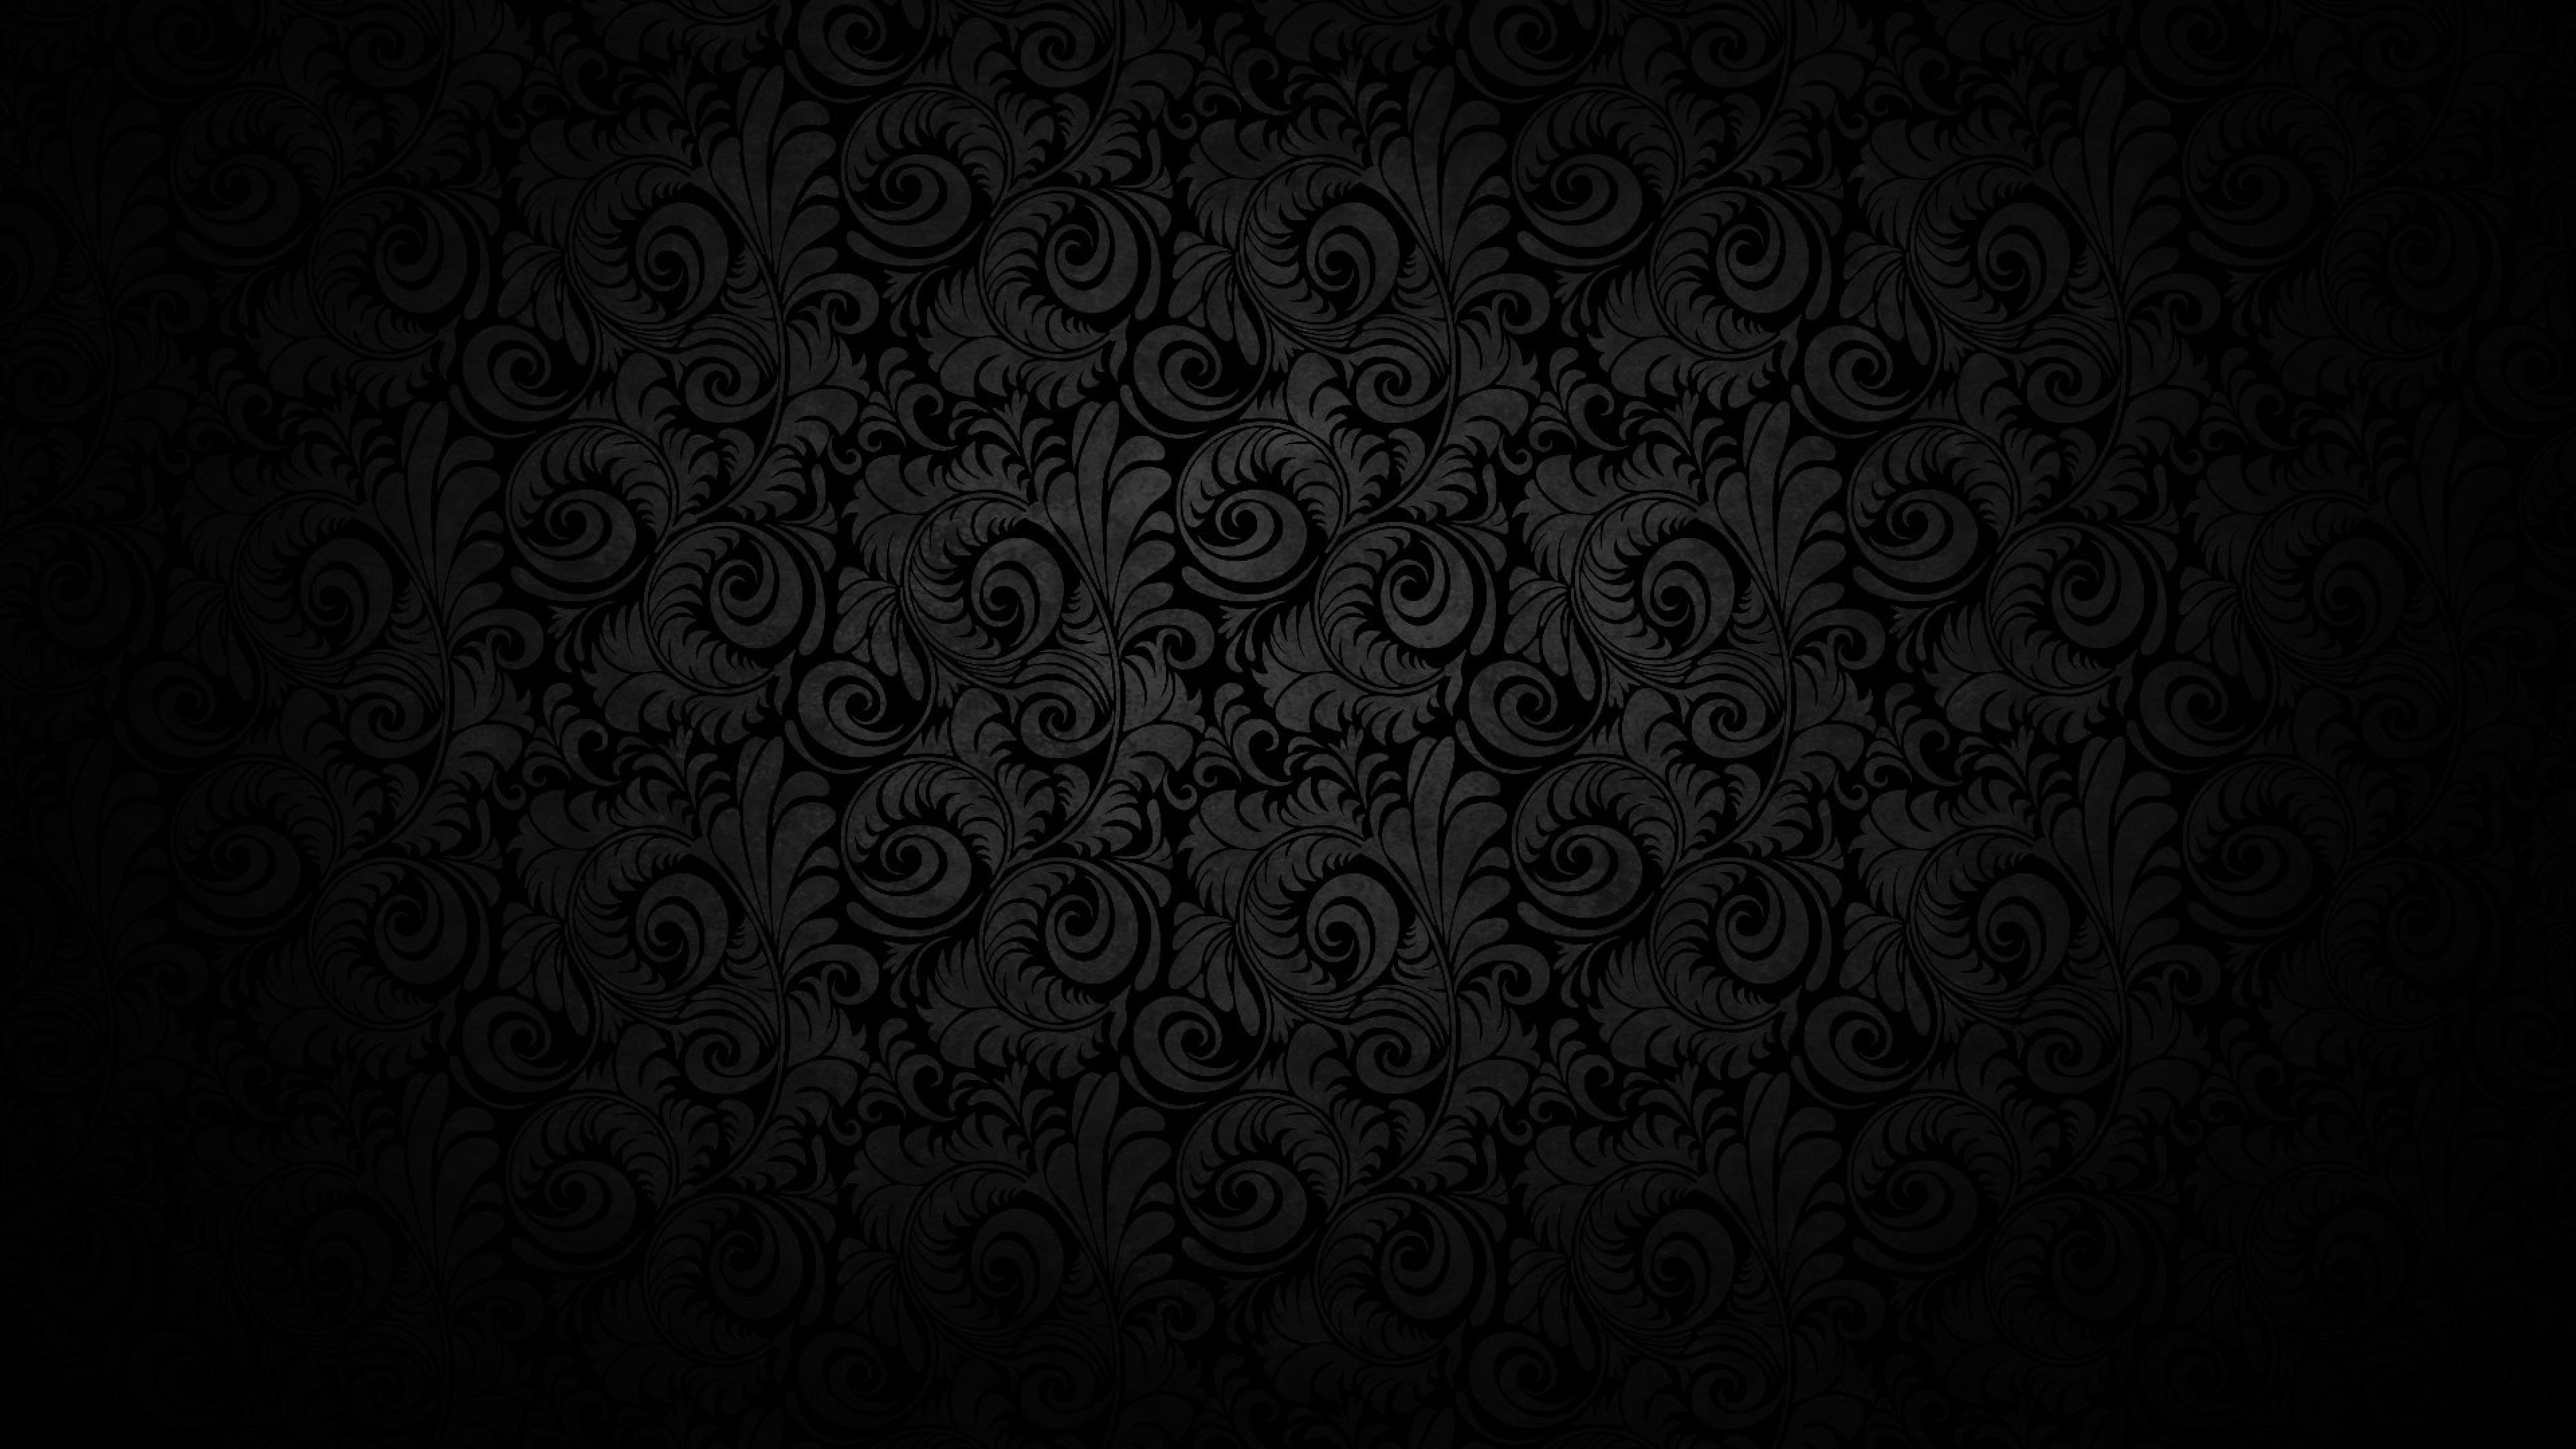 Black 4k uhd 169 wallpapers hd desktop backgrounds 3840x2160 images and  pictures